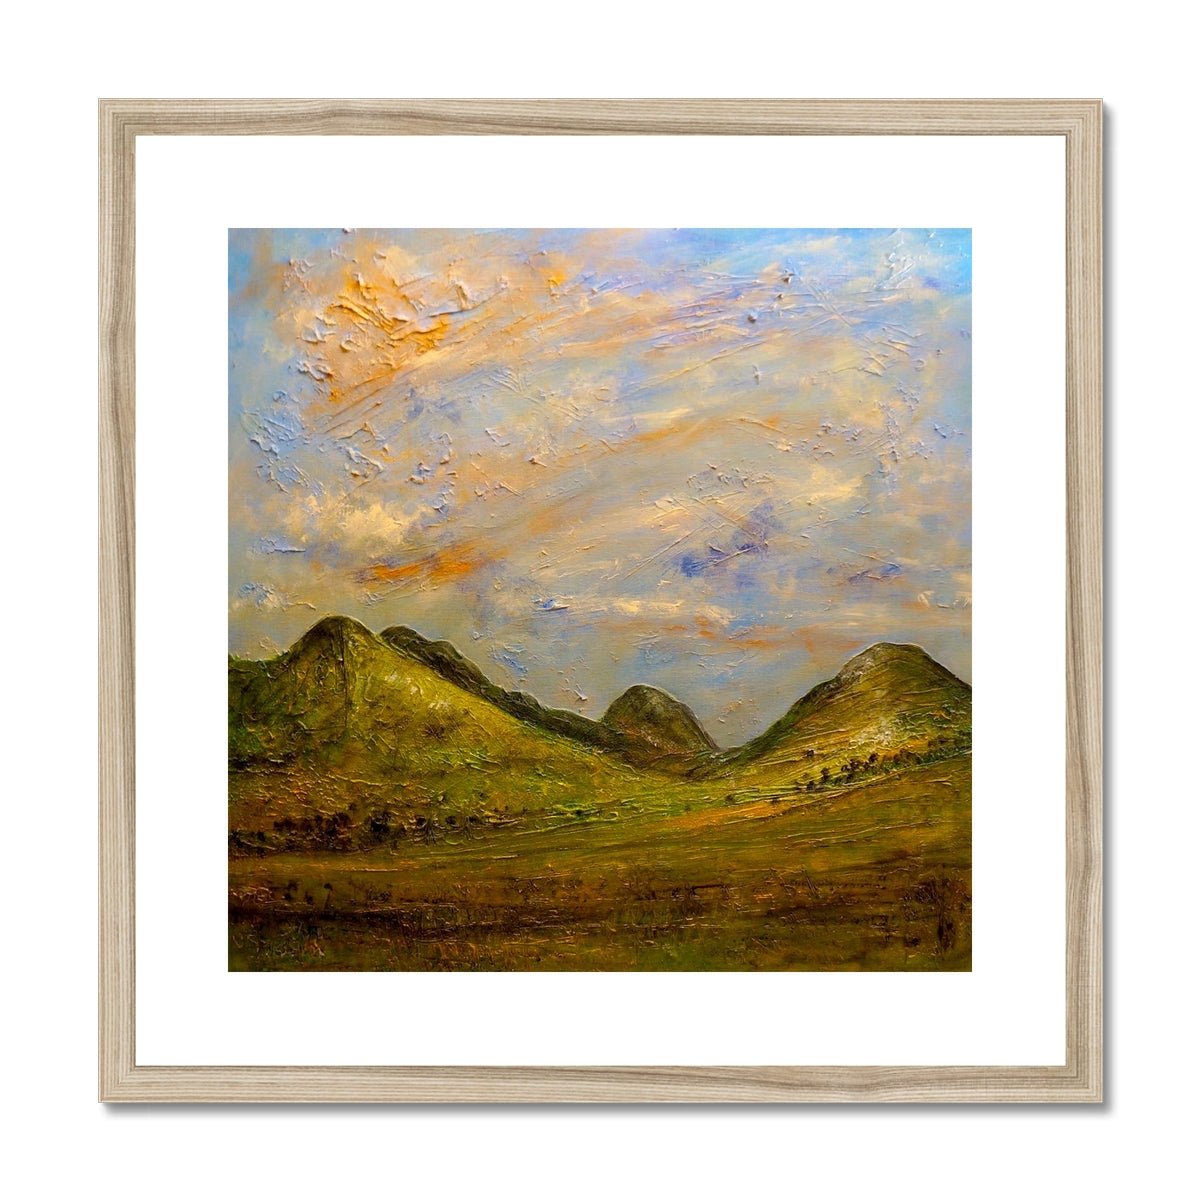 Glencoe Summer Painting | Framed & Mounted Prints From Scotland-Framed & Mounted Prints-Glencoe Art Gallery-20"x20"-Natural Frame-Paintings, Prints, Homeware, Art Gifts From Scotland By Scottish Artist Kevin Hunter